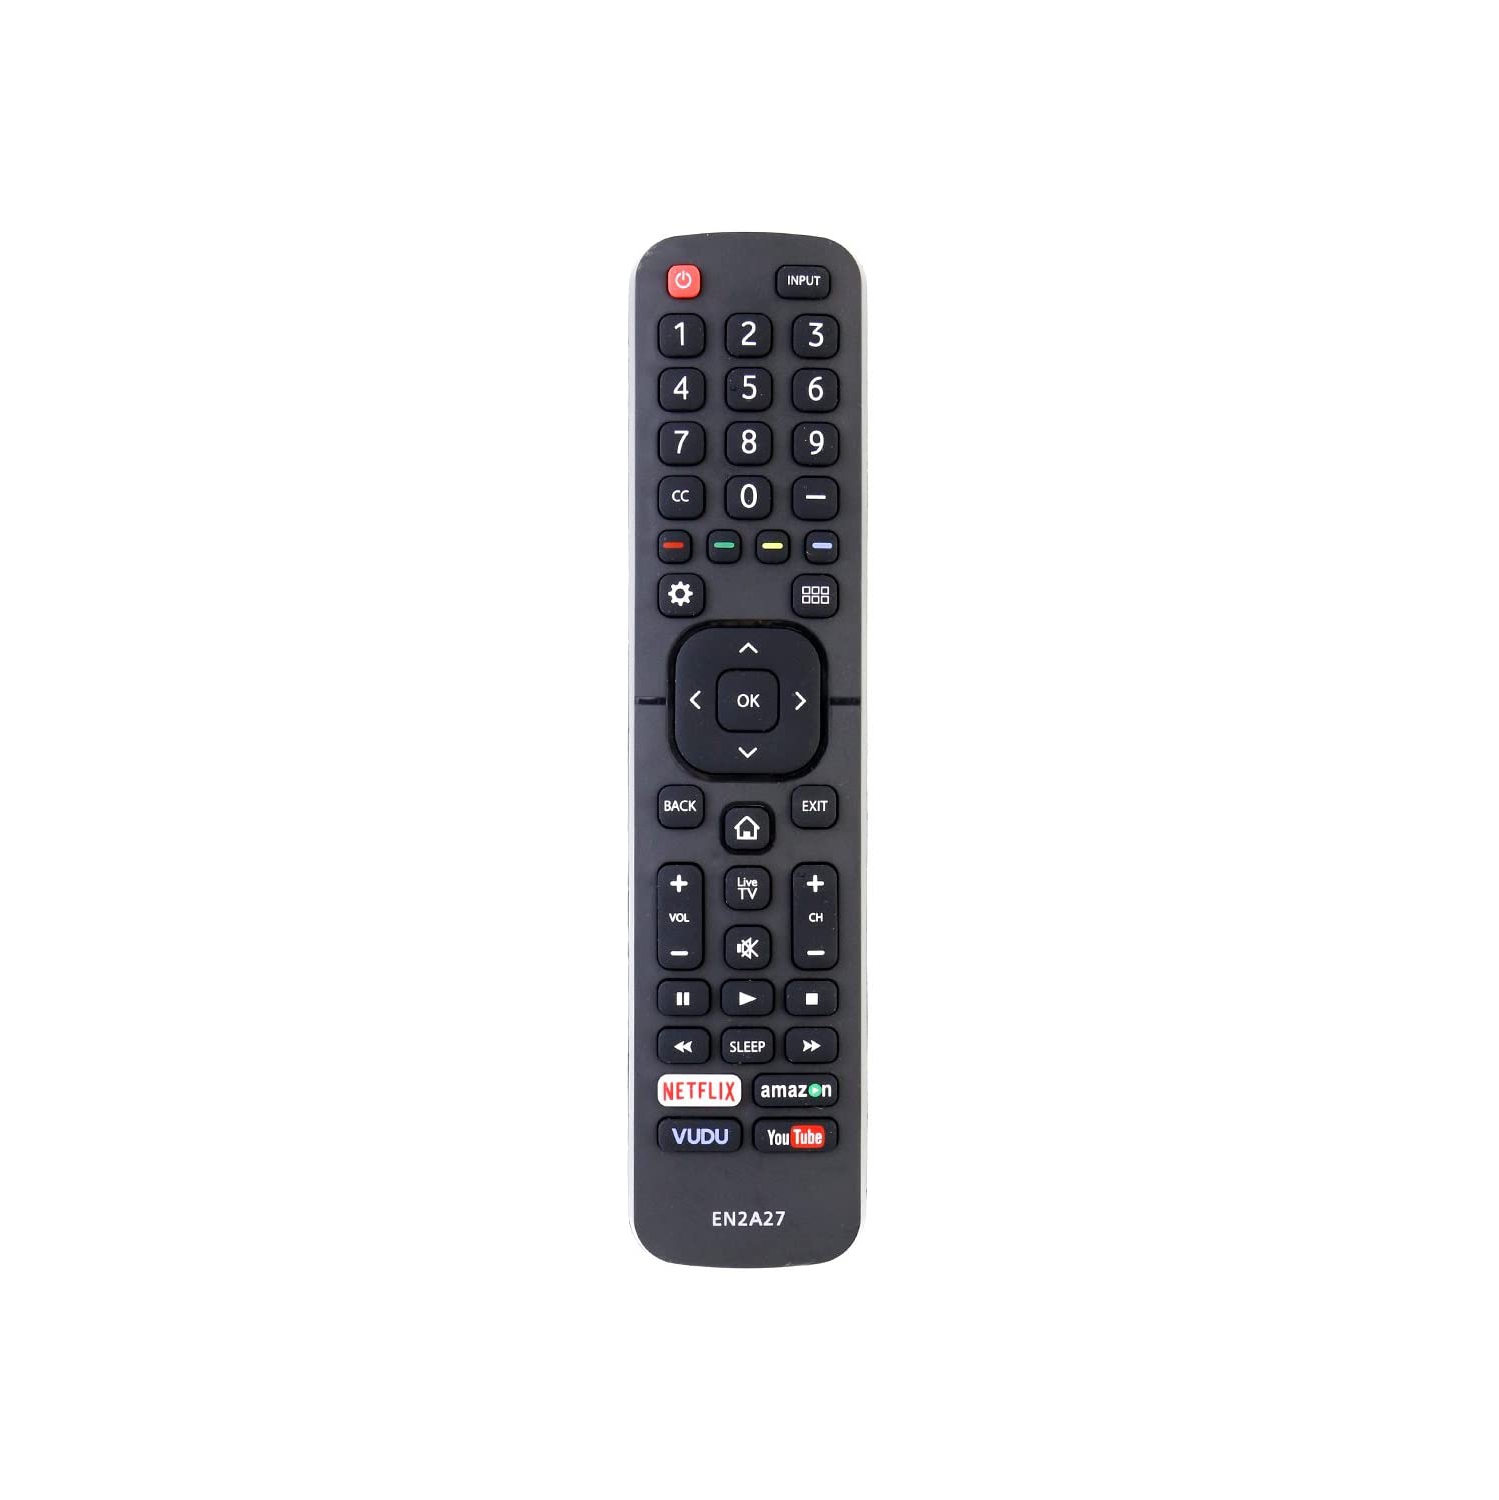 New EN2A27 Replaced Remote fit for Hisense LED TV 55H6B 50H7GB 40H5C 43H5C 43H7C 50CU6000 50H5C 50H6C 50H7C 50H7GB1 50H8C 55H5C 55H6B 55H7B 55H7C 55H8C 55H9B2 65CU6200 65H10B ERF6B11